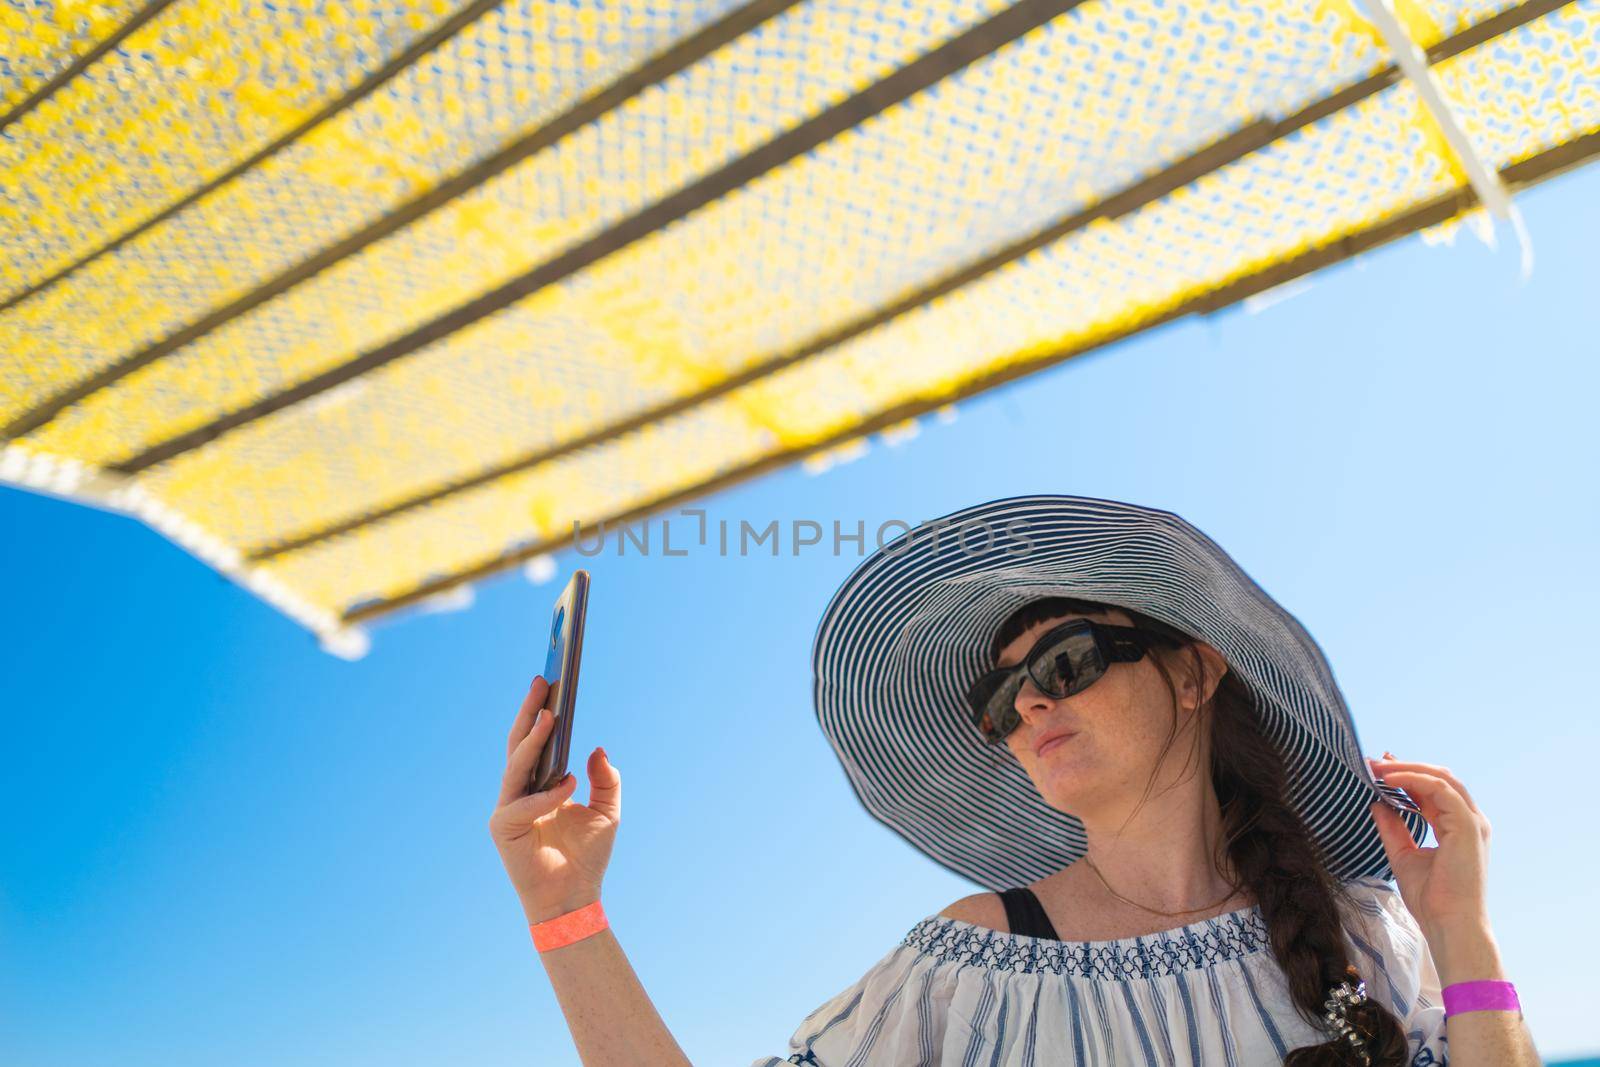 Summer beach holidays. on the beach, a girl in a striped hat with a large brim and a light cape under a yellow canopy protecting her from the scorching sun takes a selfie. The girl smiles and enjoys a sunny day. The concept of a happy lifestyle.